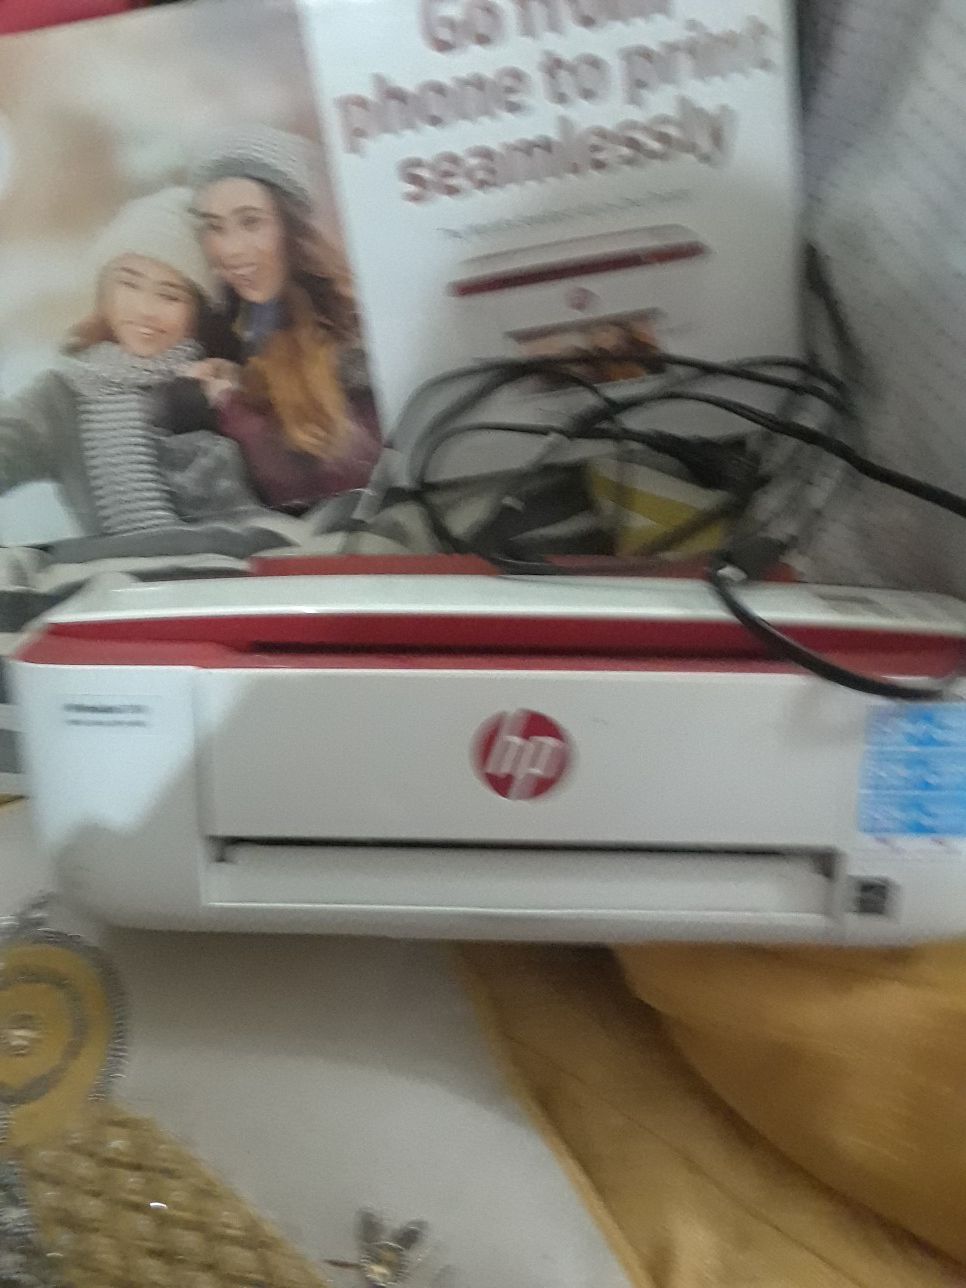 H P Go to phone to print seamlessly PRINTER $50.00 cash only (SERIOUS BUYERS)